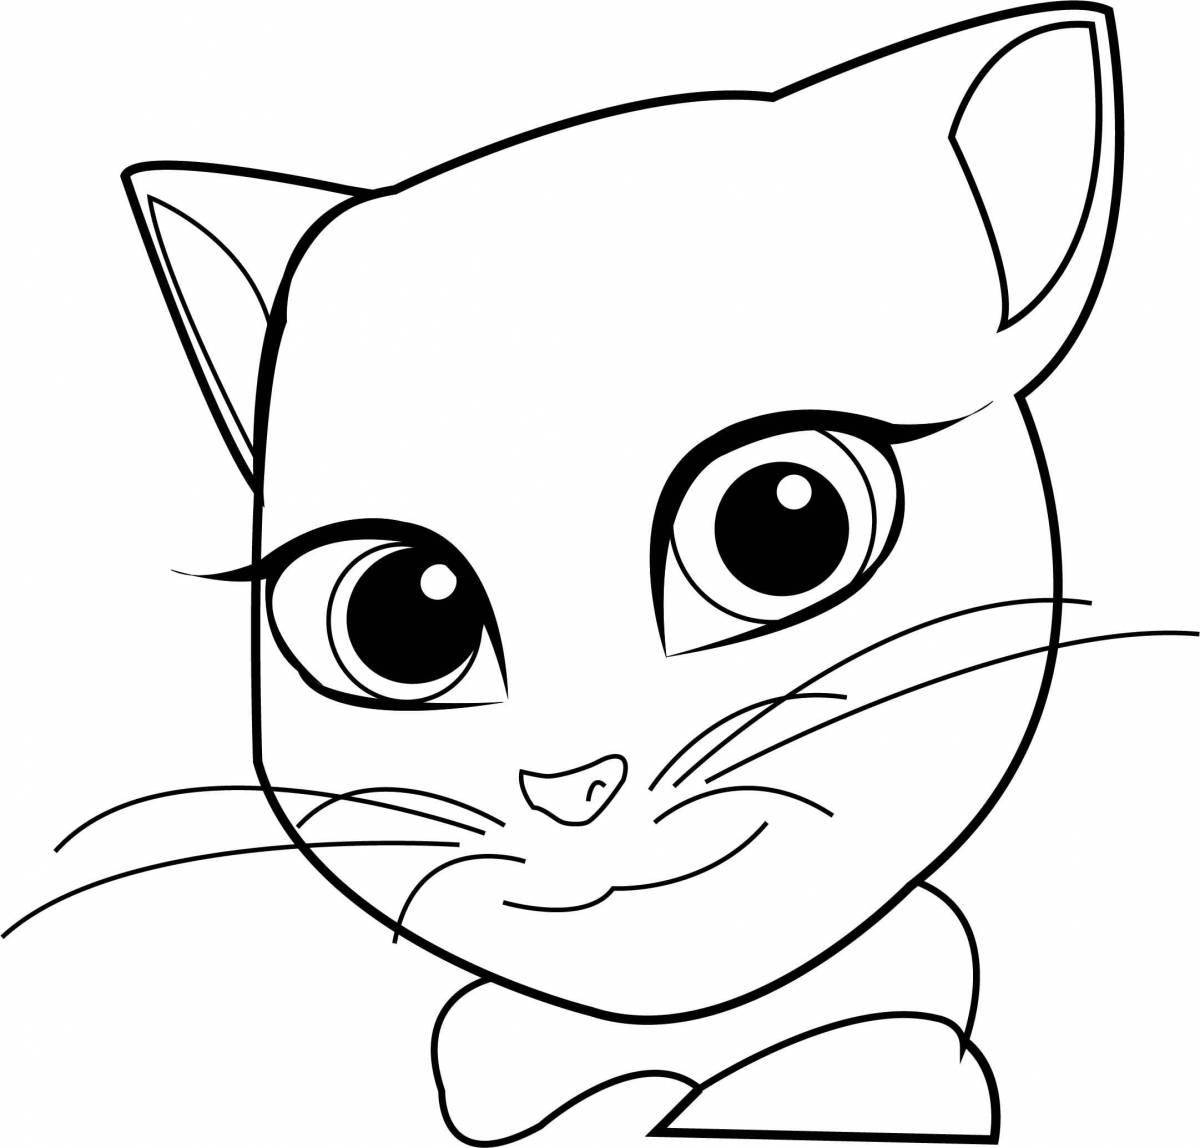 Charming tom and angel coloring pages for kids